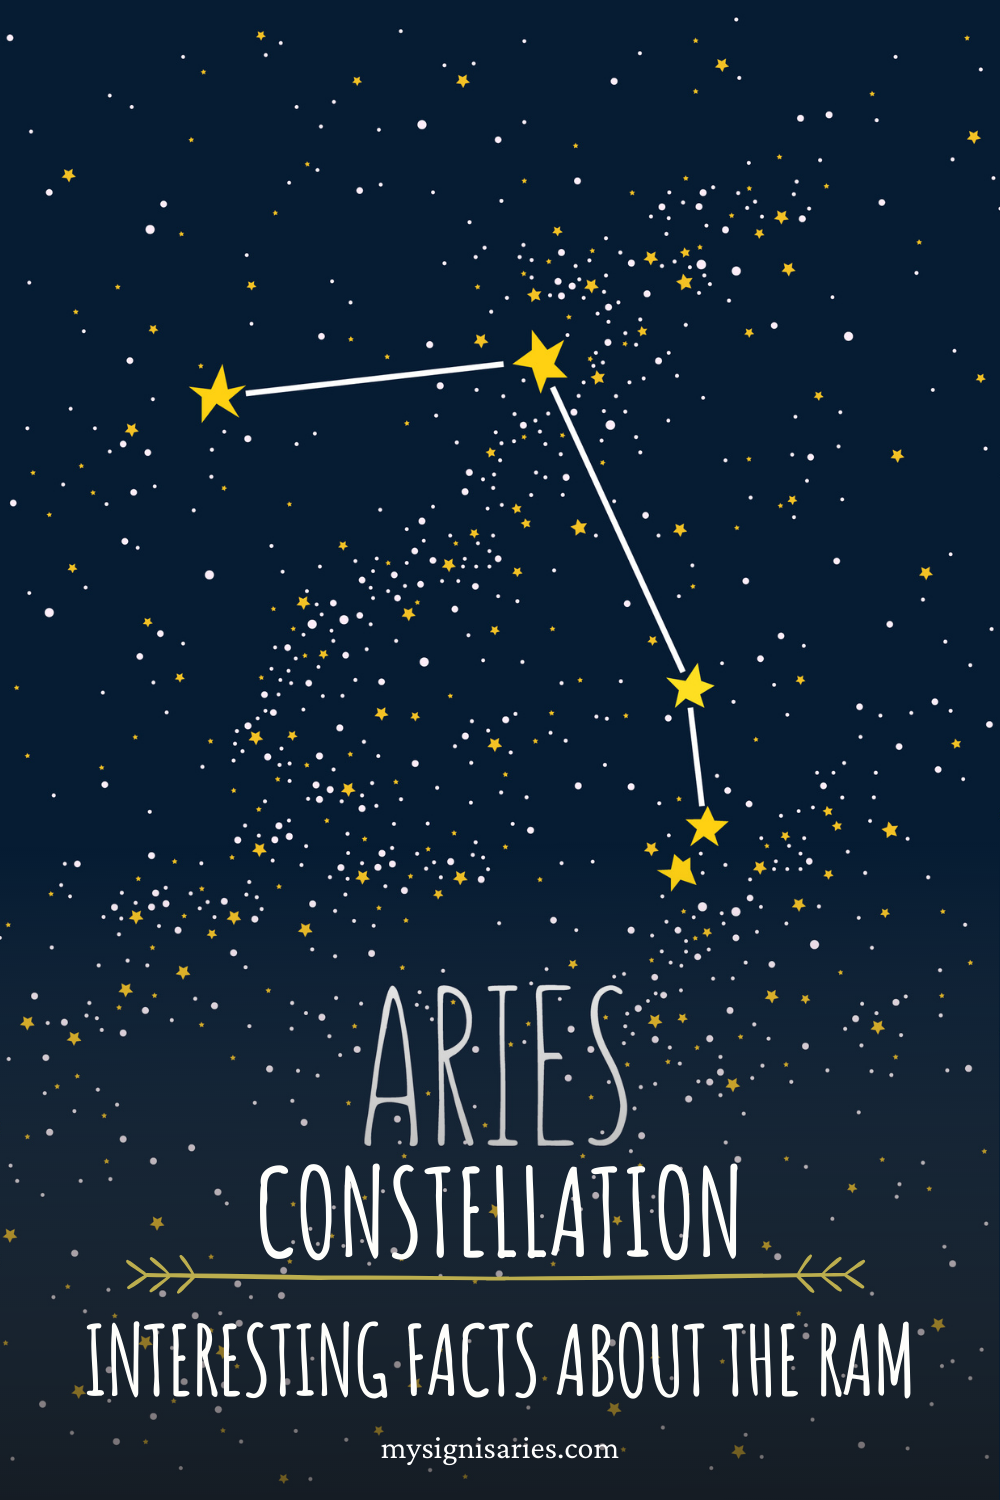 Aries Constellation: Interesting Facts About the Aries Ram #aries #astrology #zodiacsign